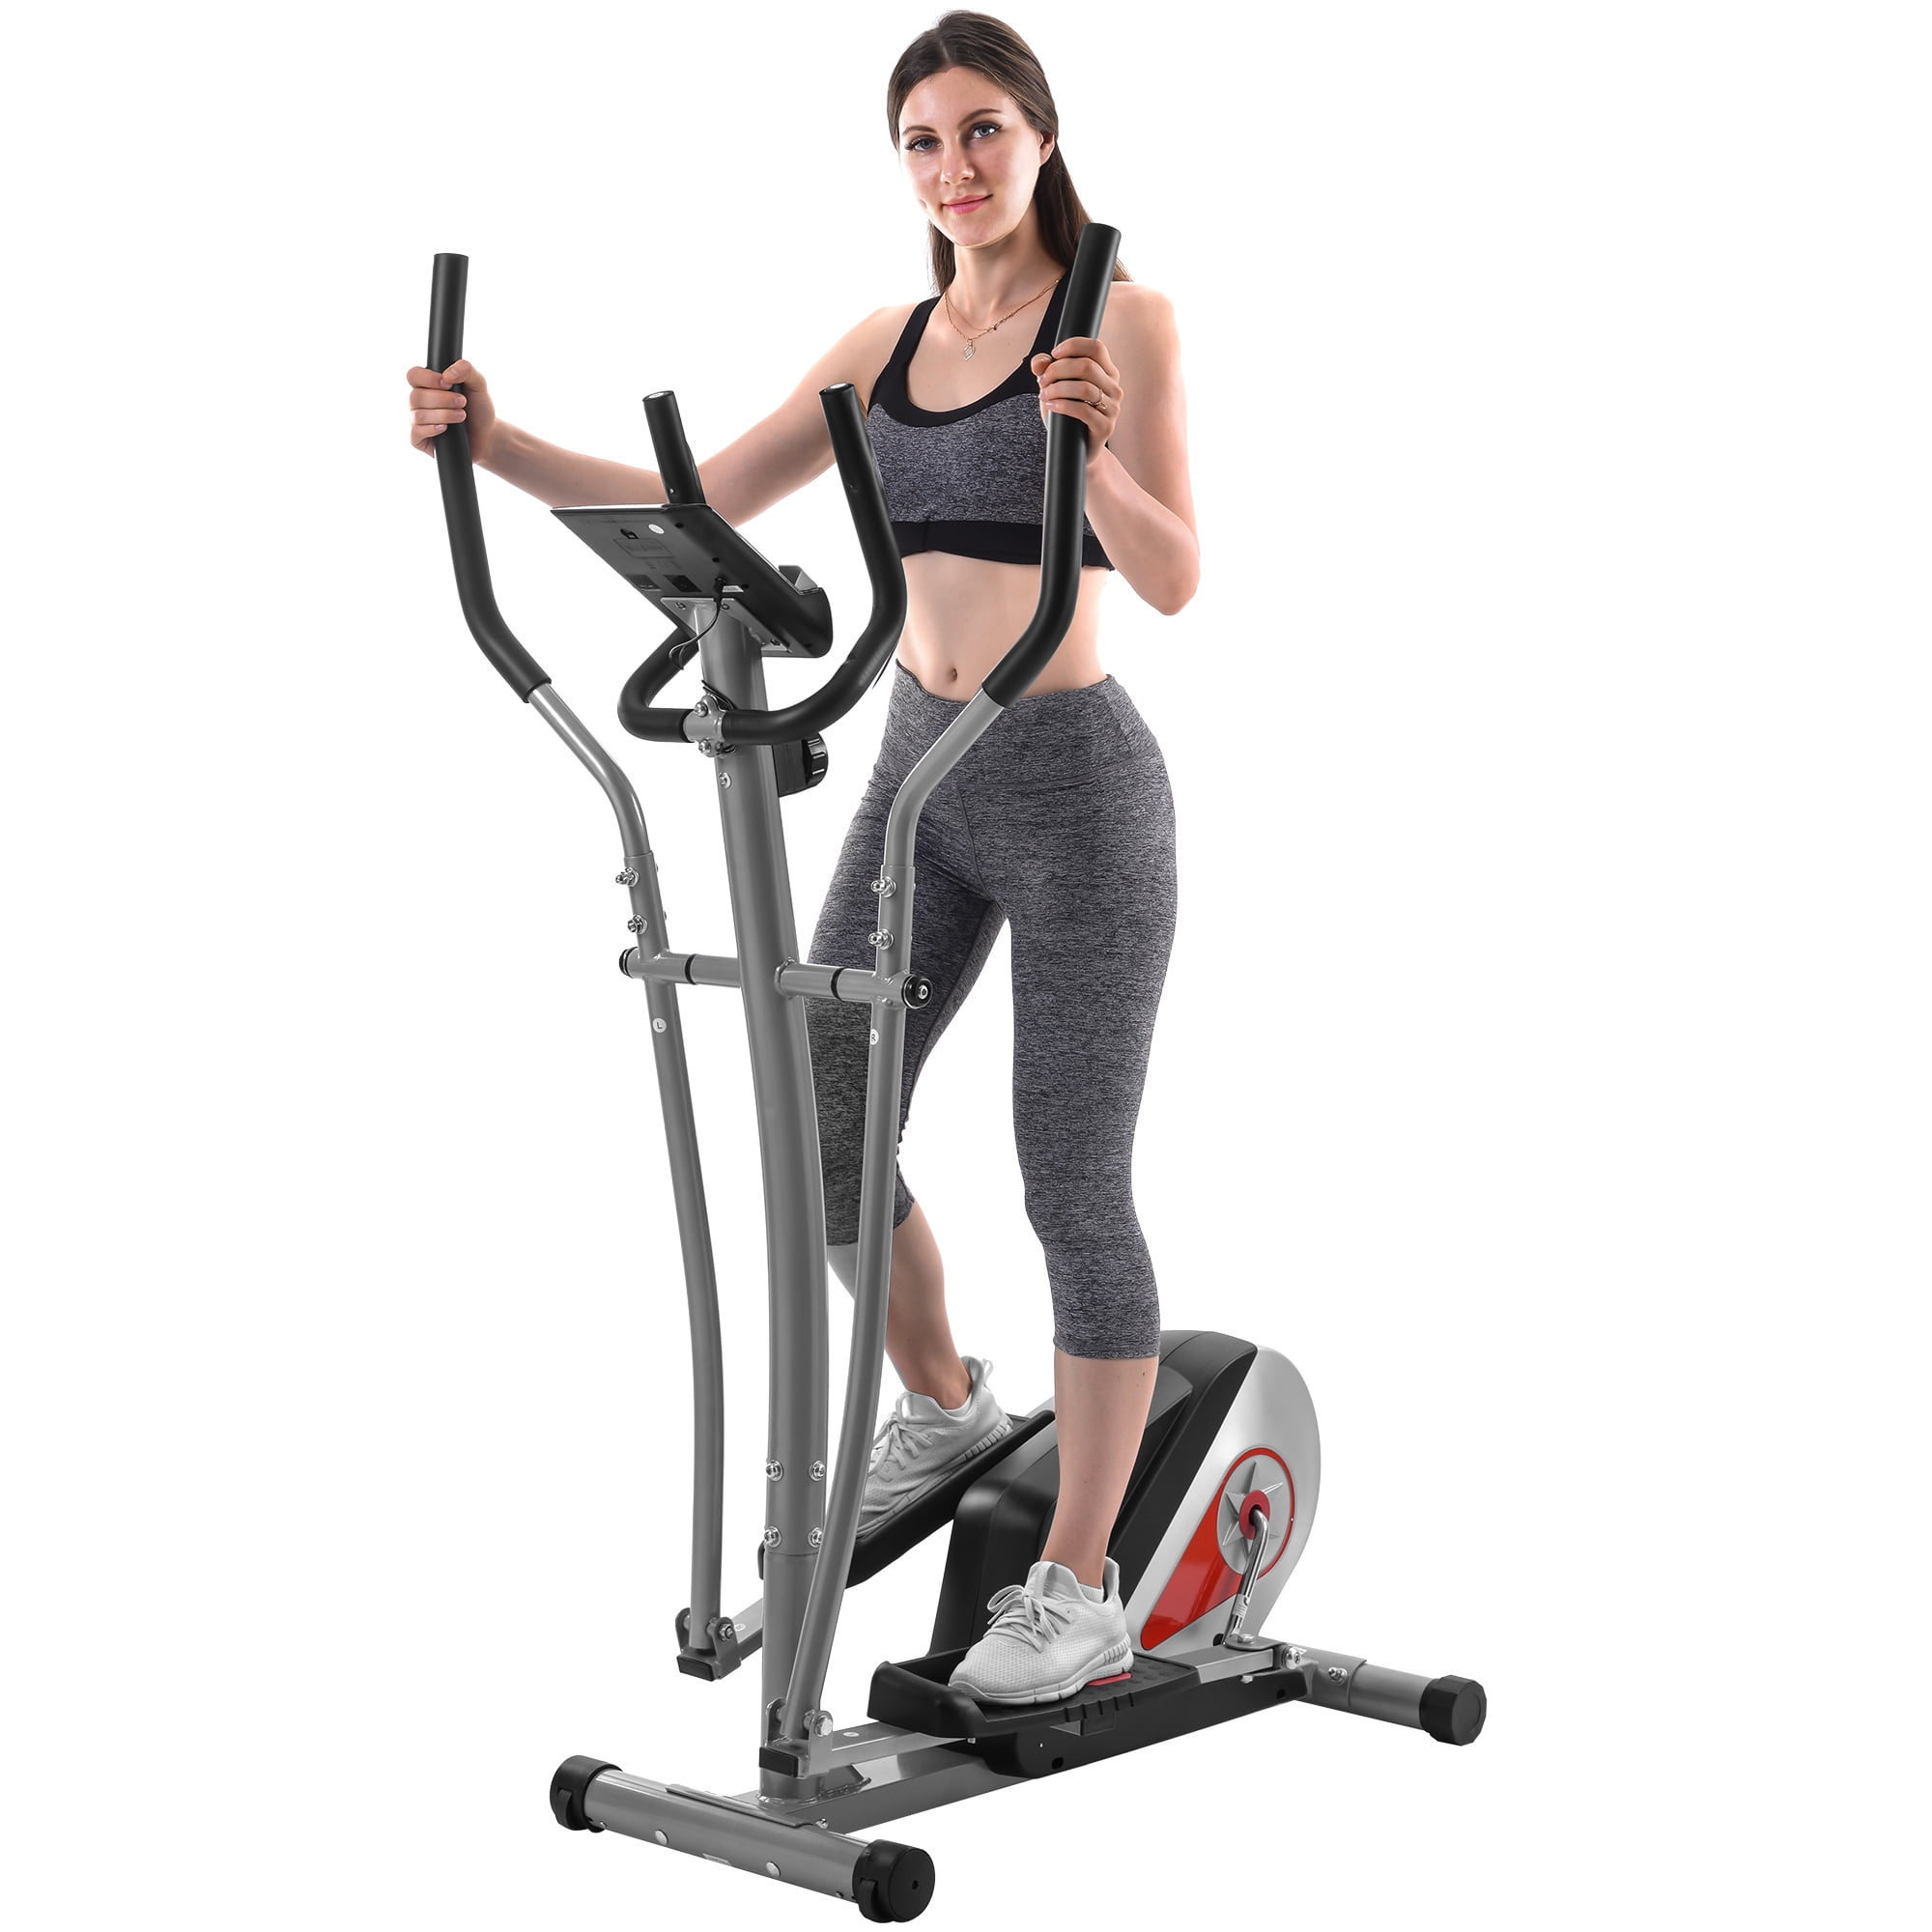 Smooth Quiet Driven for Home Gym Elliptical Exercise Machine for Home Use 350LB Weight Limit Cross Trainer with LCD Monito Pulse Rate Grips and 8 Level Magnetic Resistance 